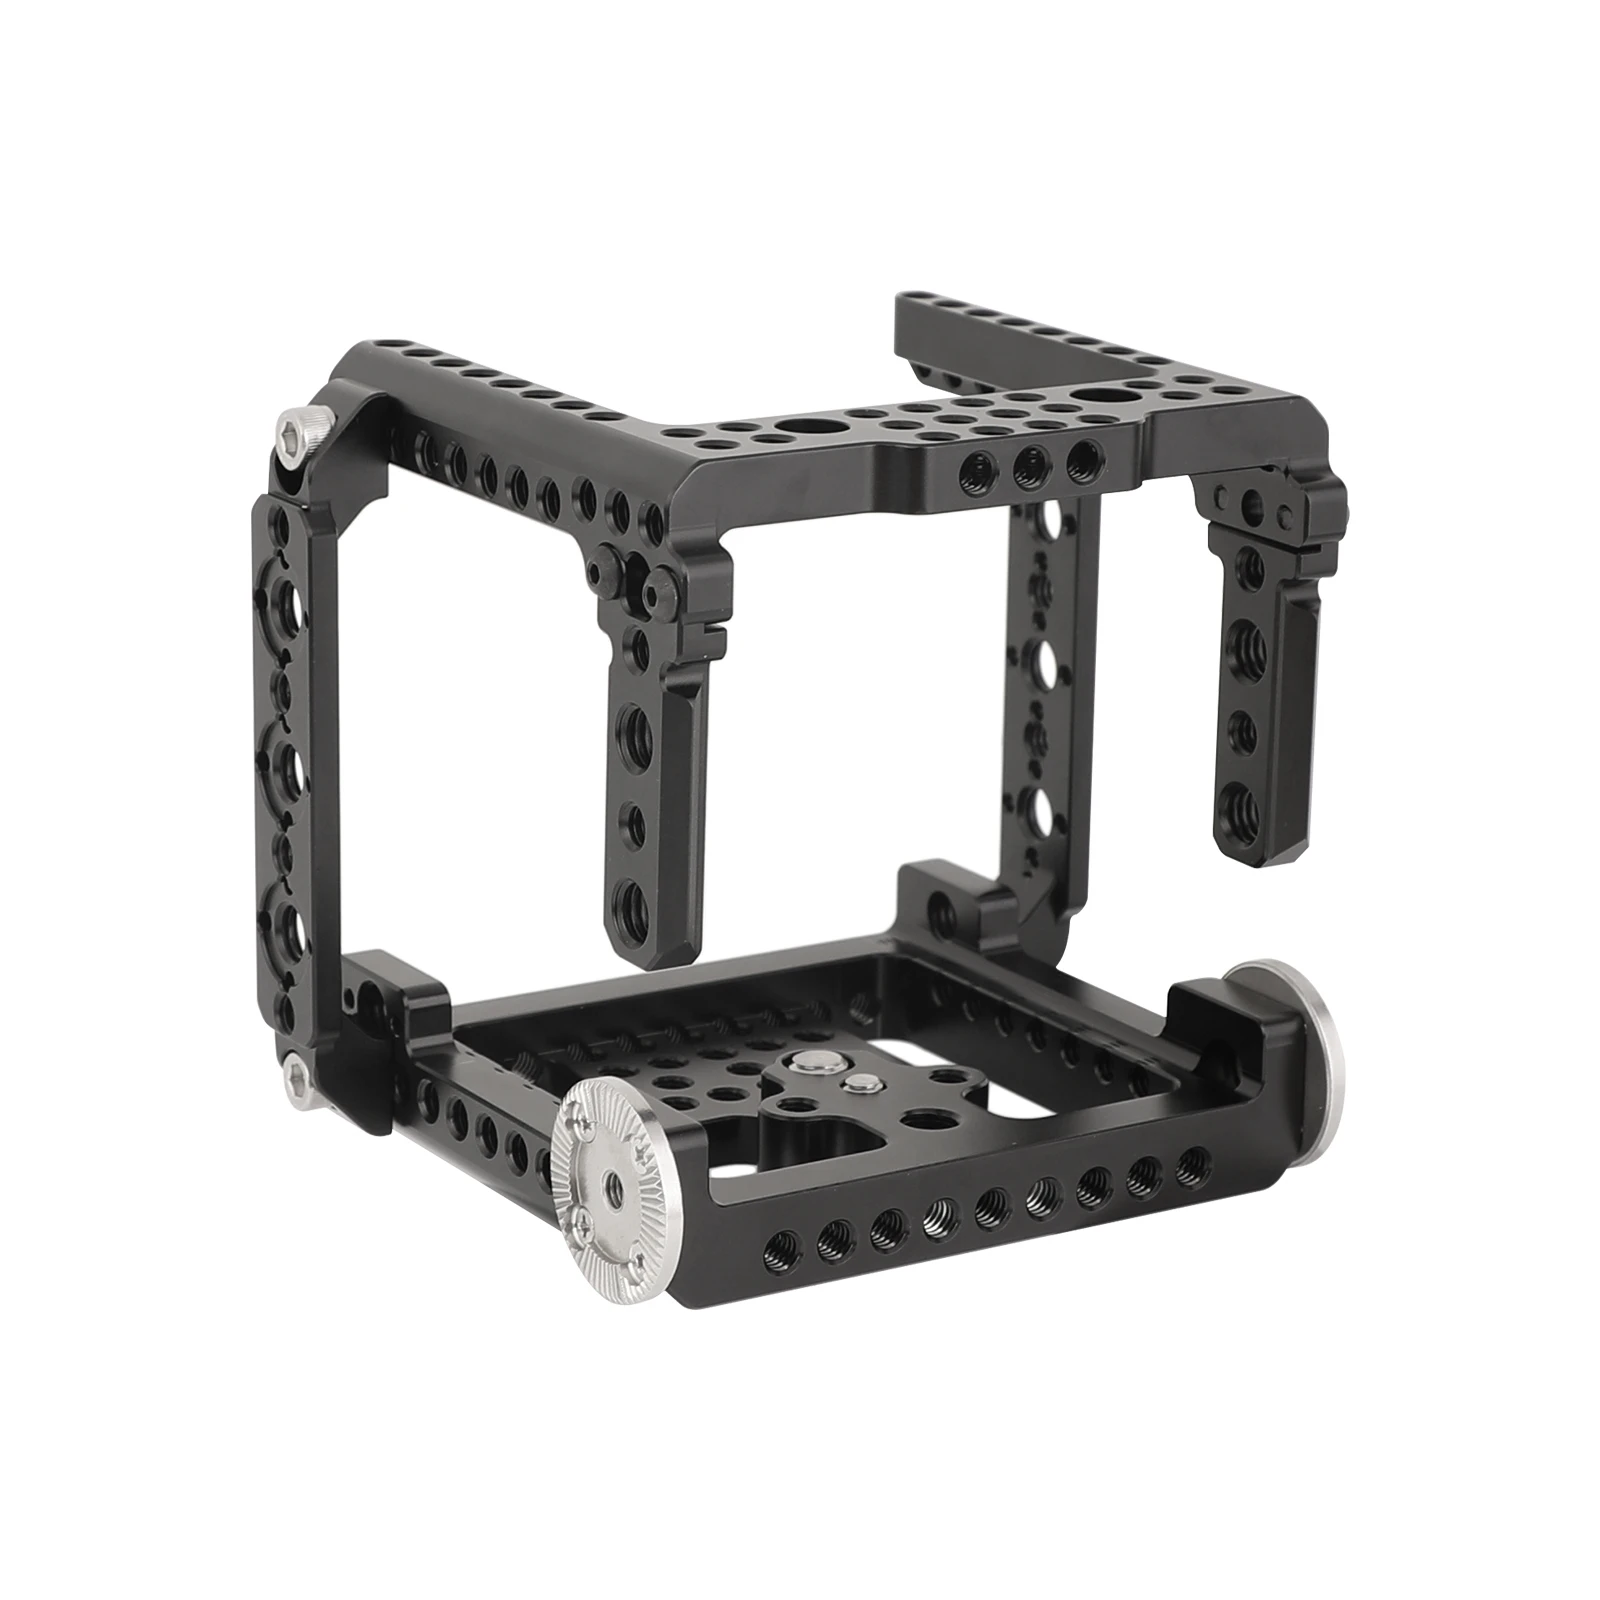 

HDRIG Exclusive Cage Kit With ARRI Rosette Mounts And NATO Rails For RED Komodo 6K Cinema Camera